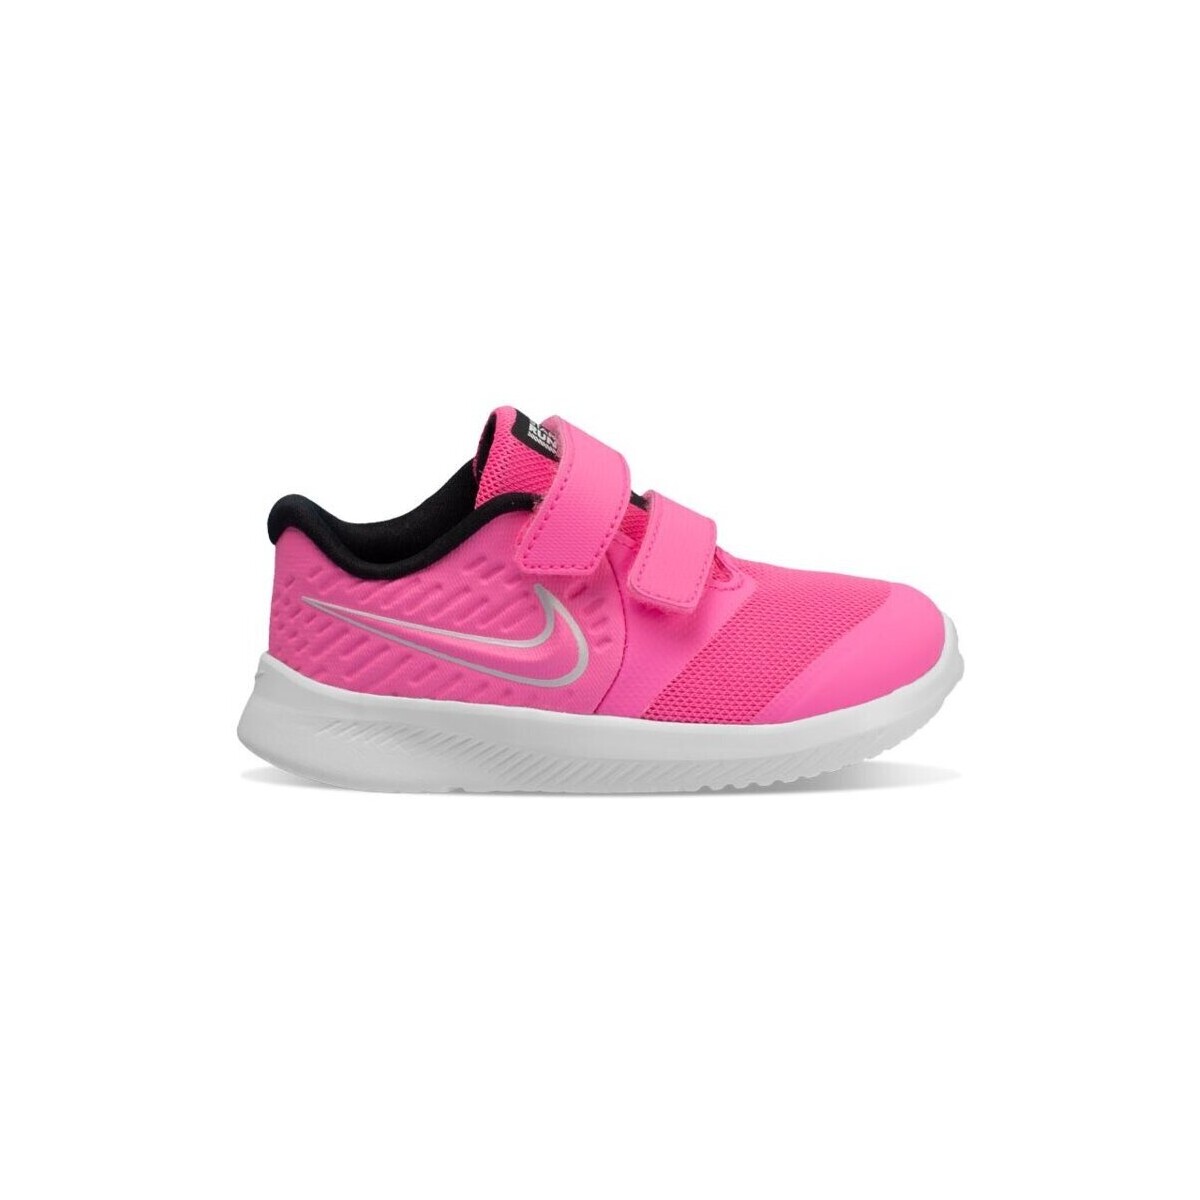 Schuhe Mädchen Sneaker Nike Low Star Runner 2 Baby/Toddle,PINK AT1803 603 Other